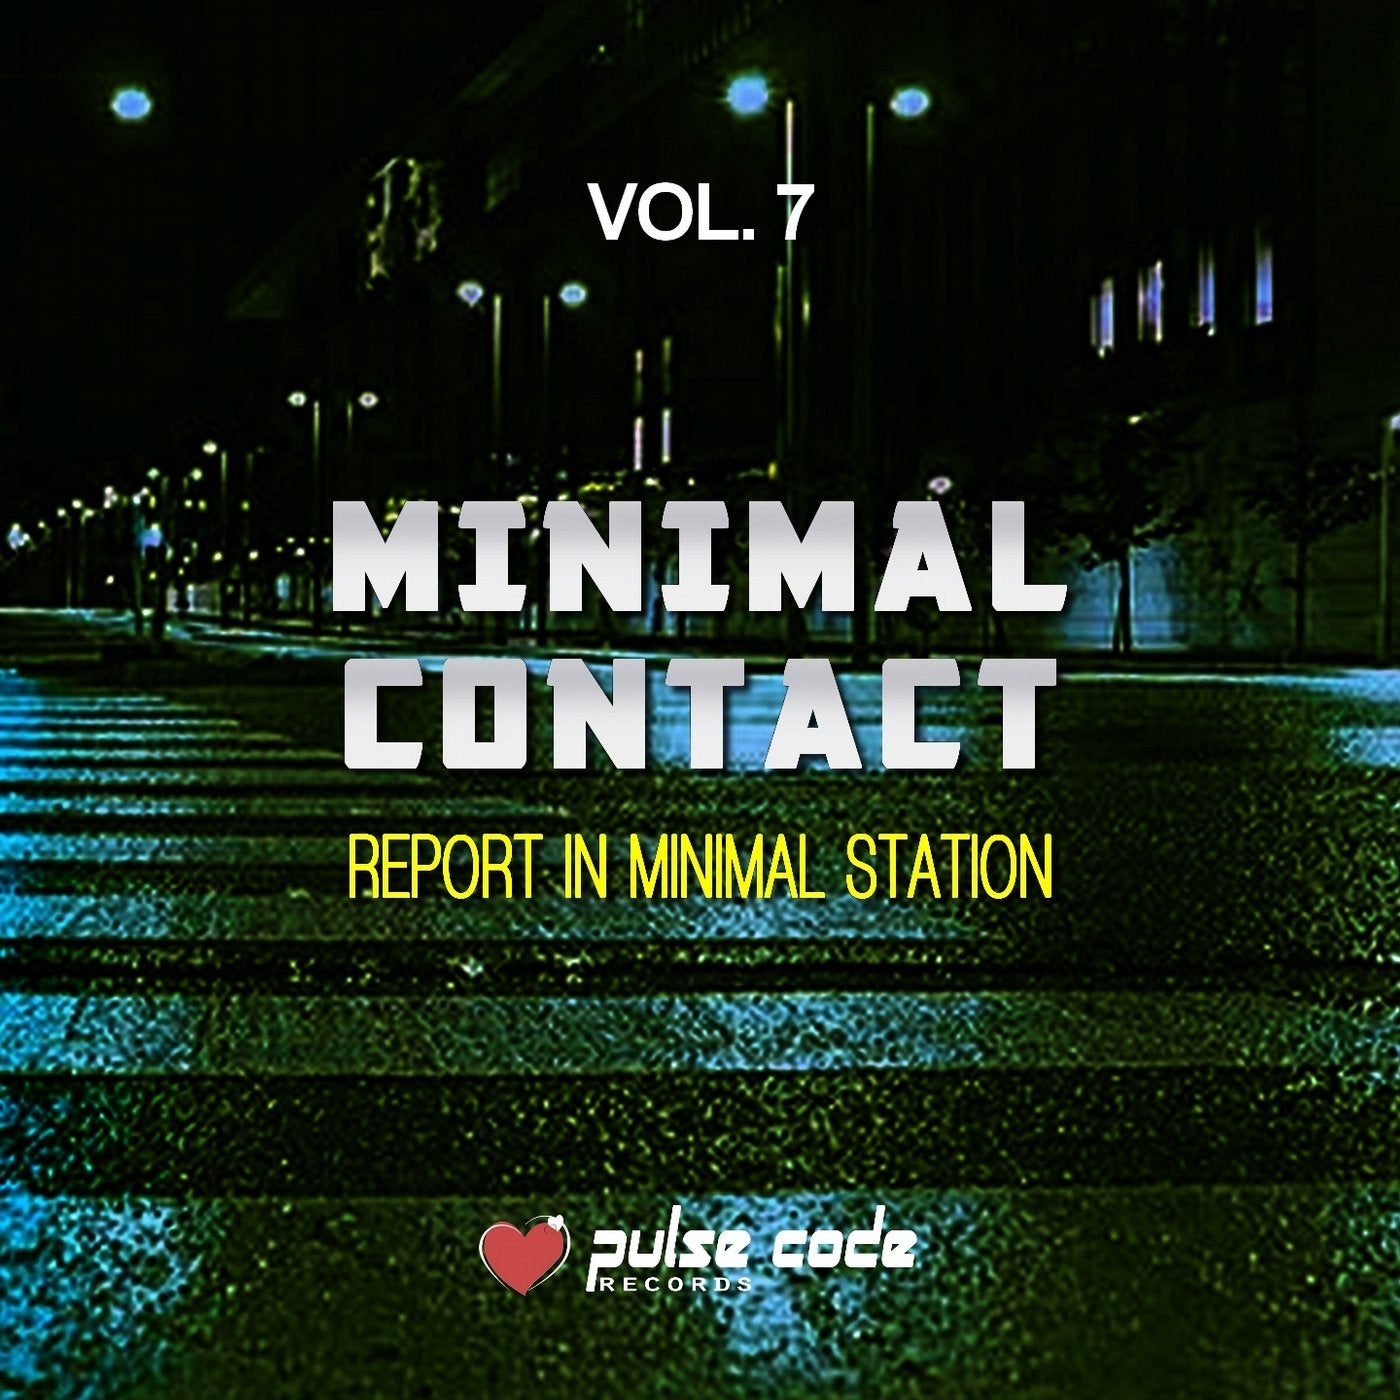 Minimal Contact, Vol. 7 (Report in Minimal Station)